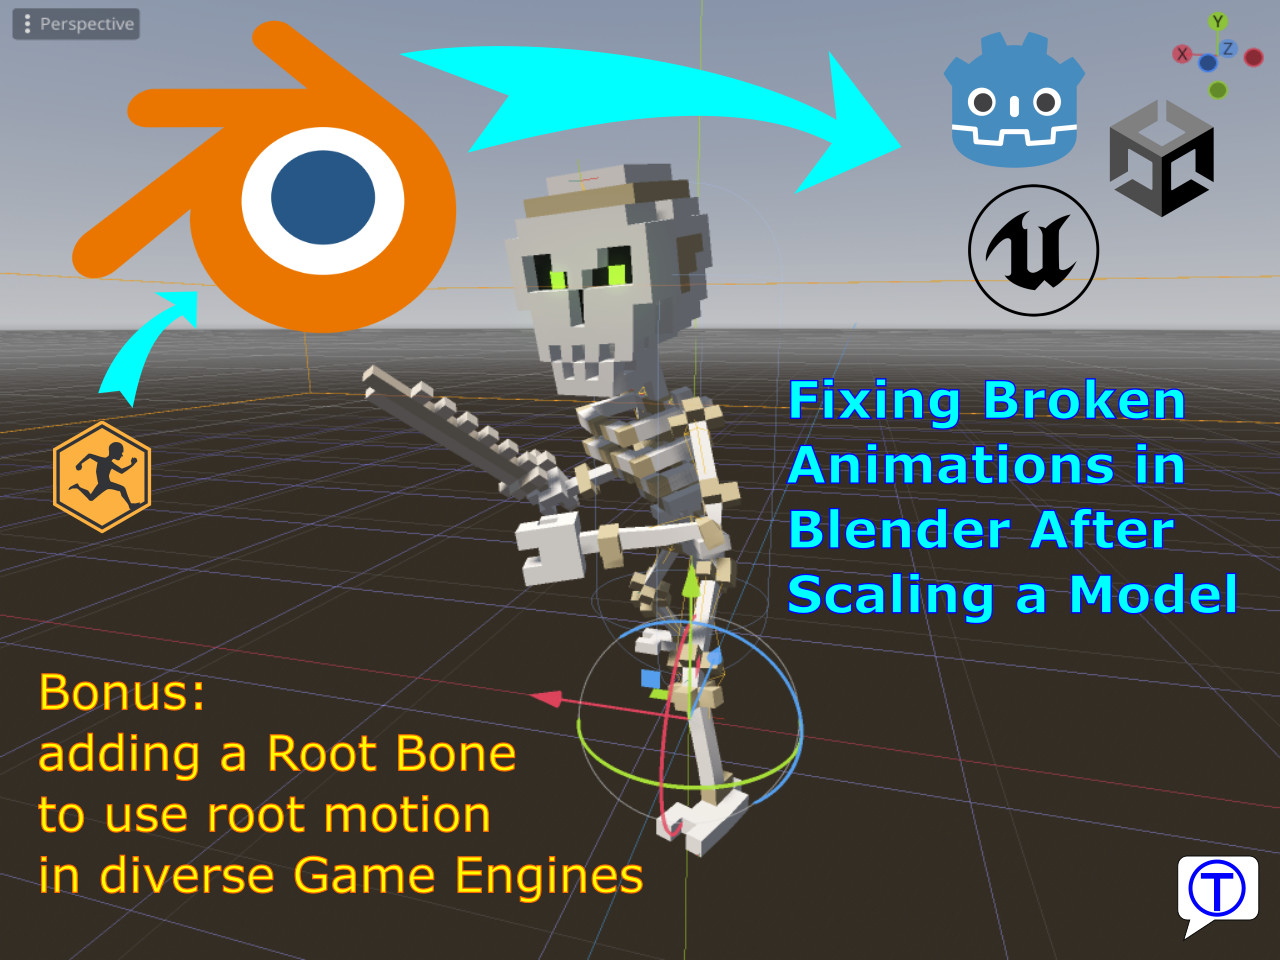 Fixing Broken Animations in Blender After Scaling a Model